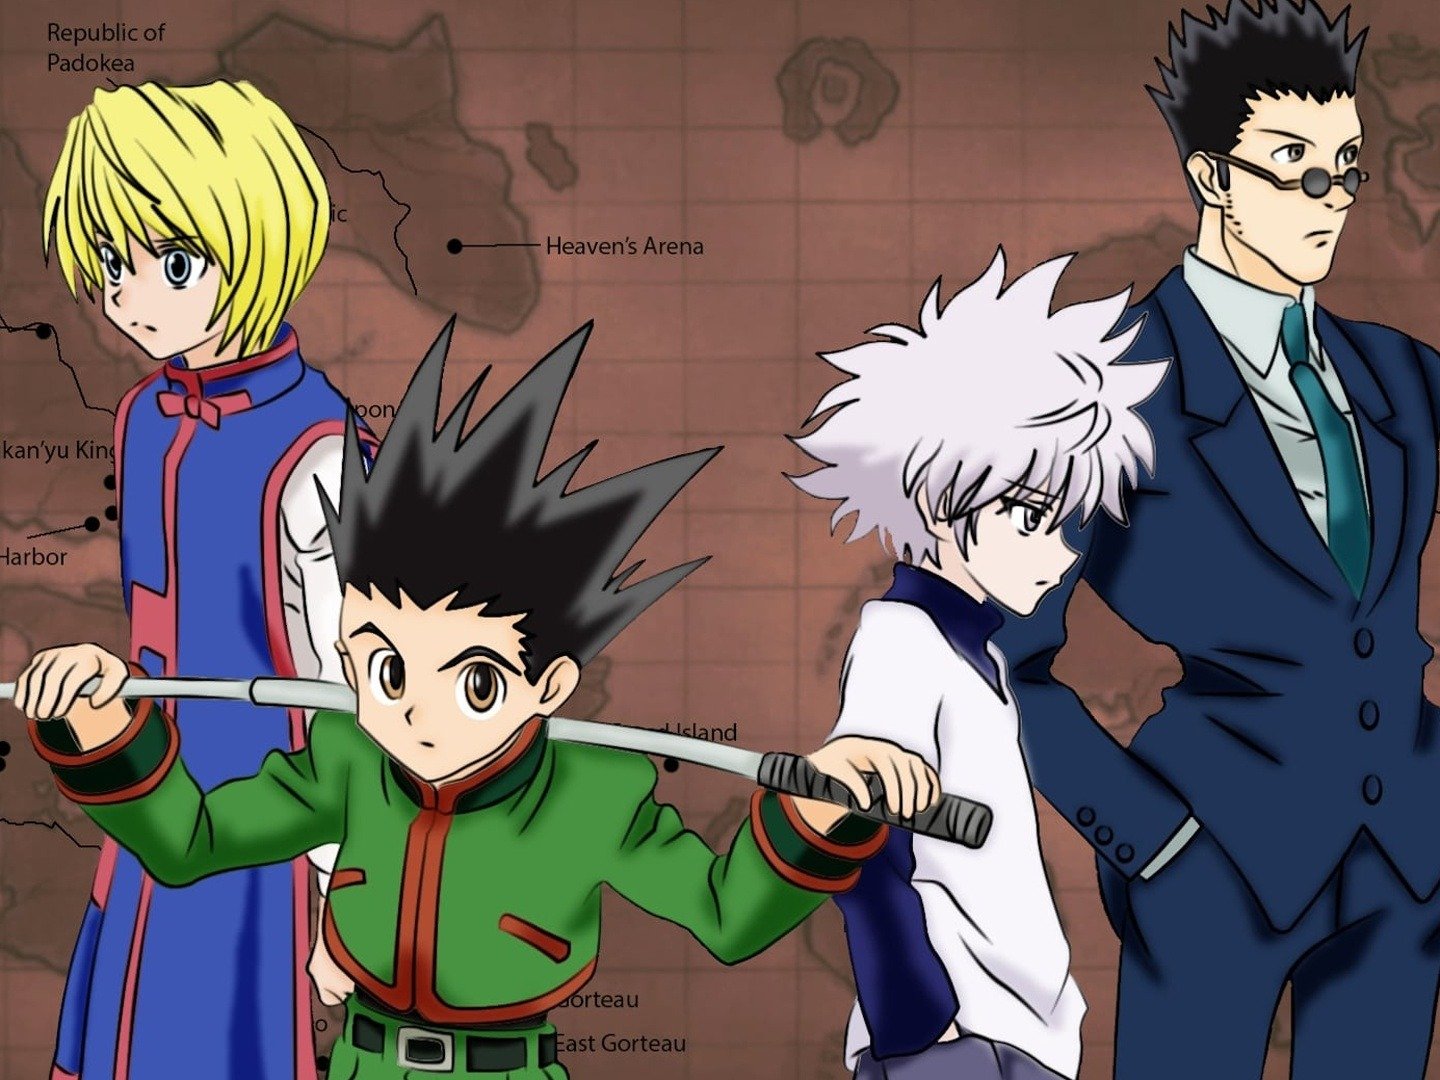 Hunter x Hunter 5 Times It Proved To Be The Best Shonen MangaAnime  5  Times It Fell Short